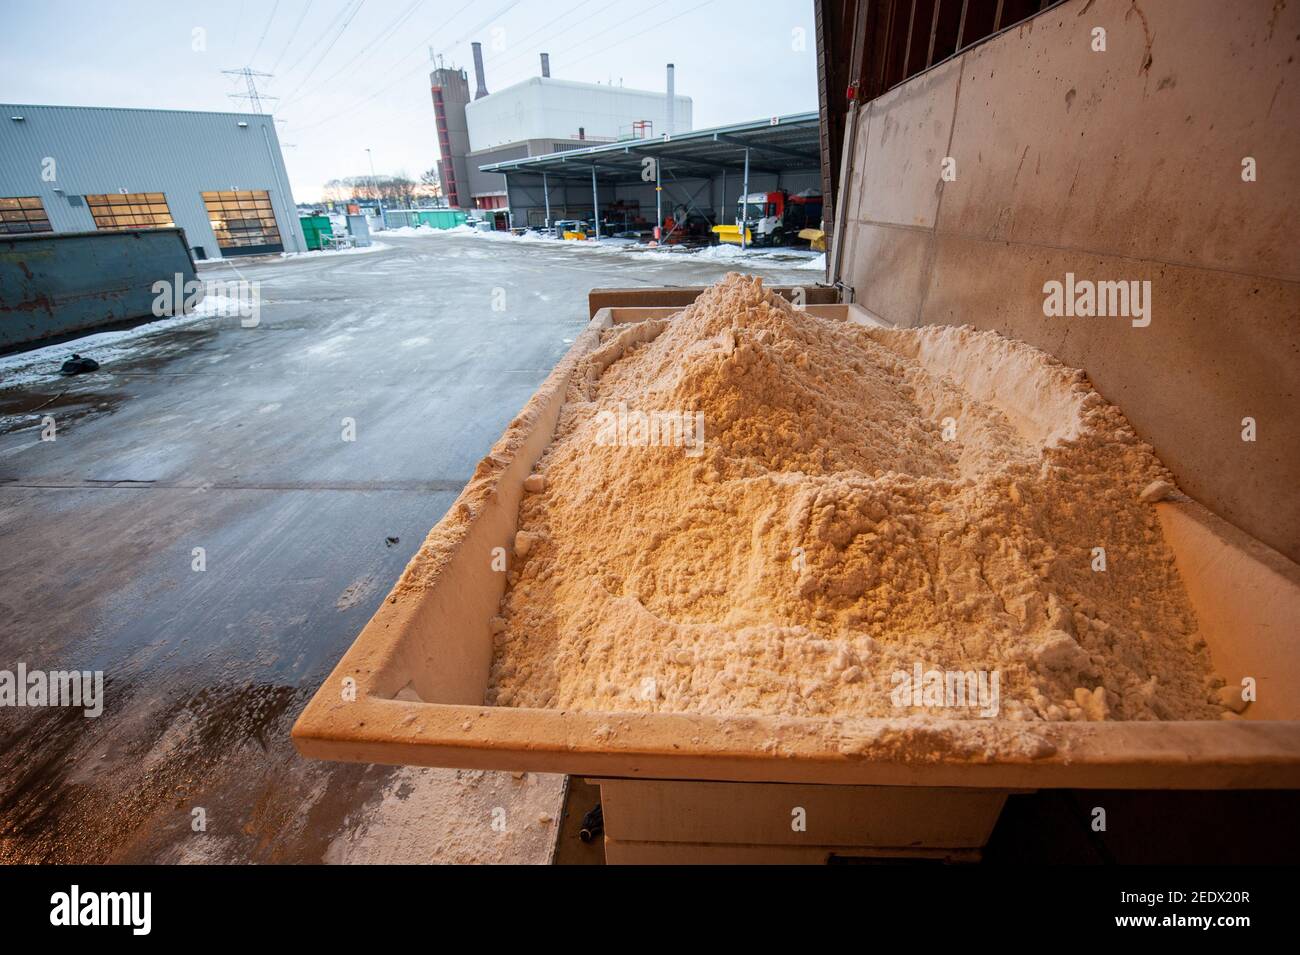 Salt in a salt storage used for anti skidding on a road. Stock Photo